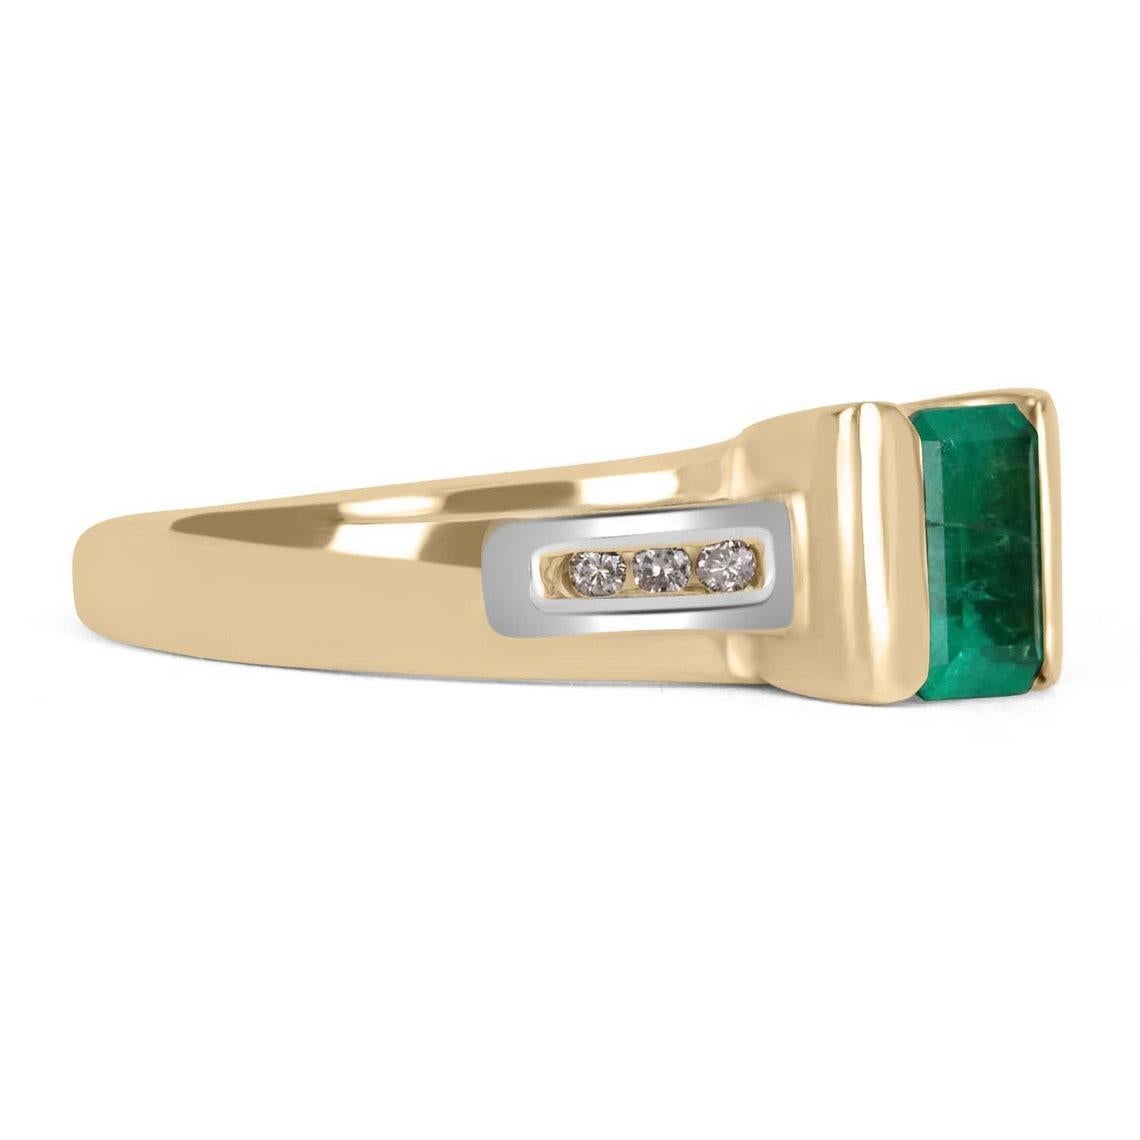 A unique Colombian emerald and diamond ladies' ring. A beautiful, medium-light green Colombian emerald weighing approximately 0.86-carats, with diamond accents on each side. The Colombian emerald is tension-set in a 14K yellow and white gold